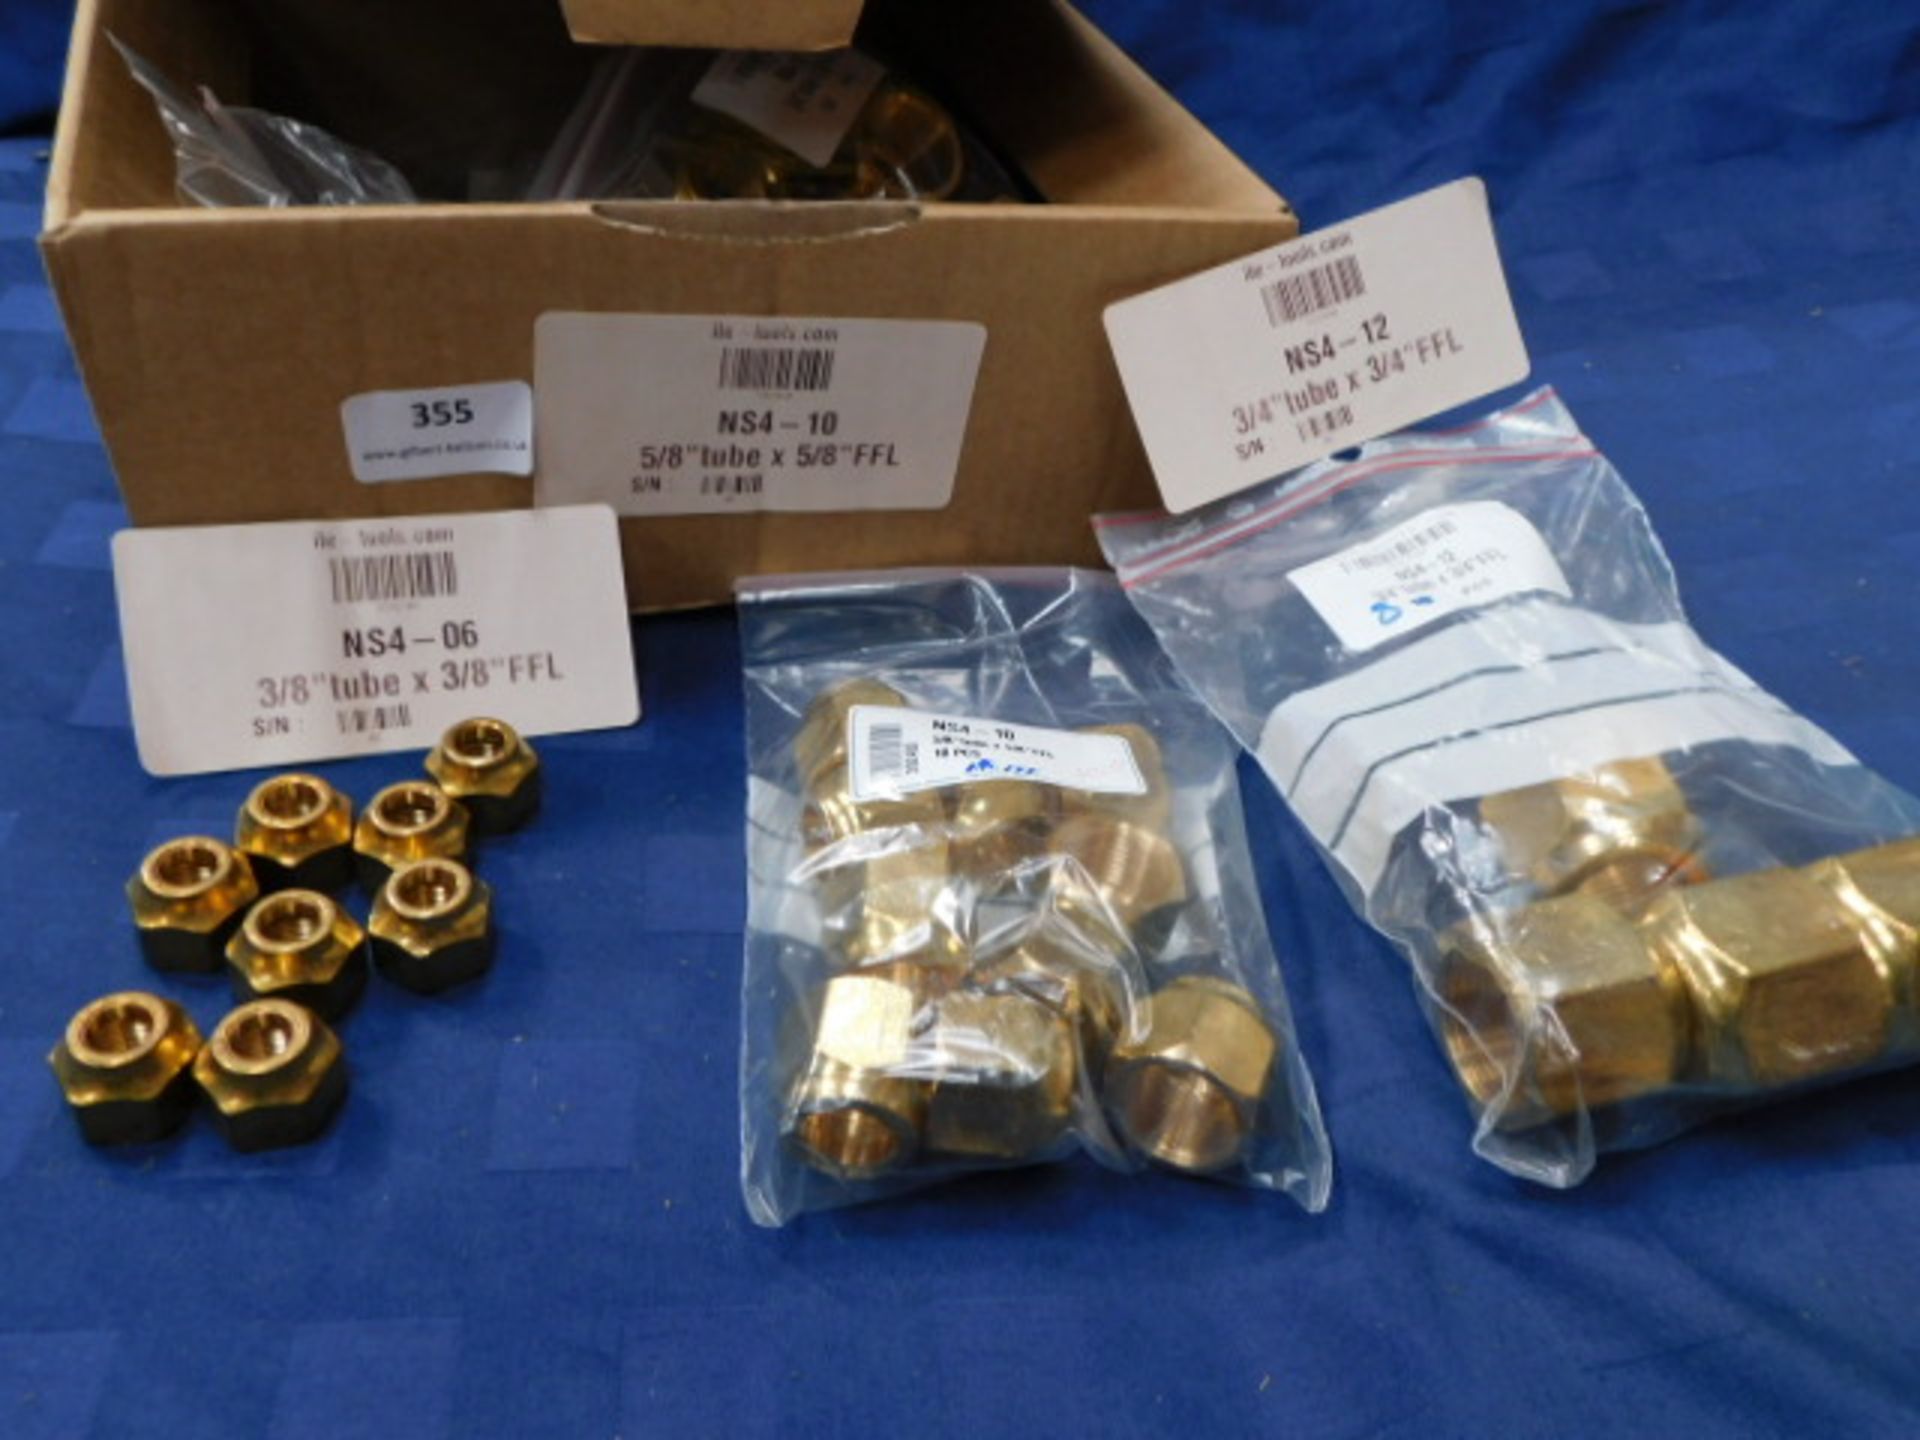 * 50 x NS4-10 Short forged nut 5/8" &14x NS4-12 Short forged nut 3/4" & 8xNS4-06 Short forged nut